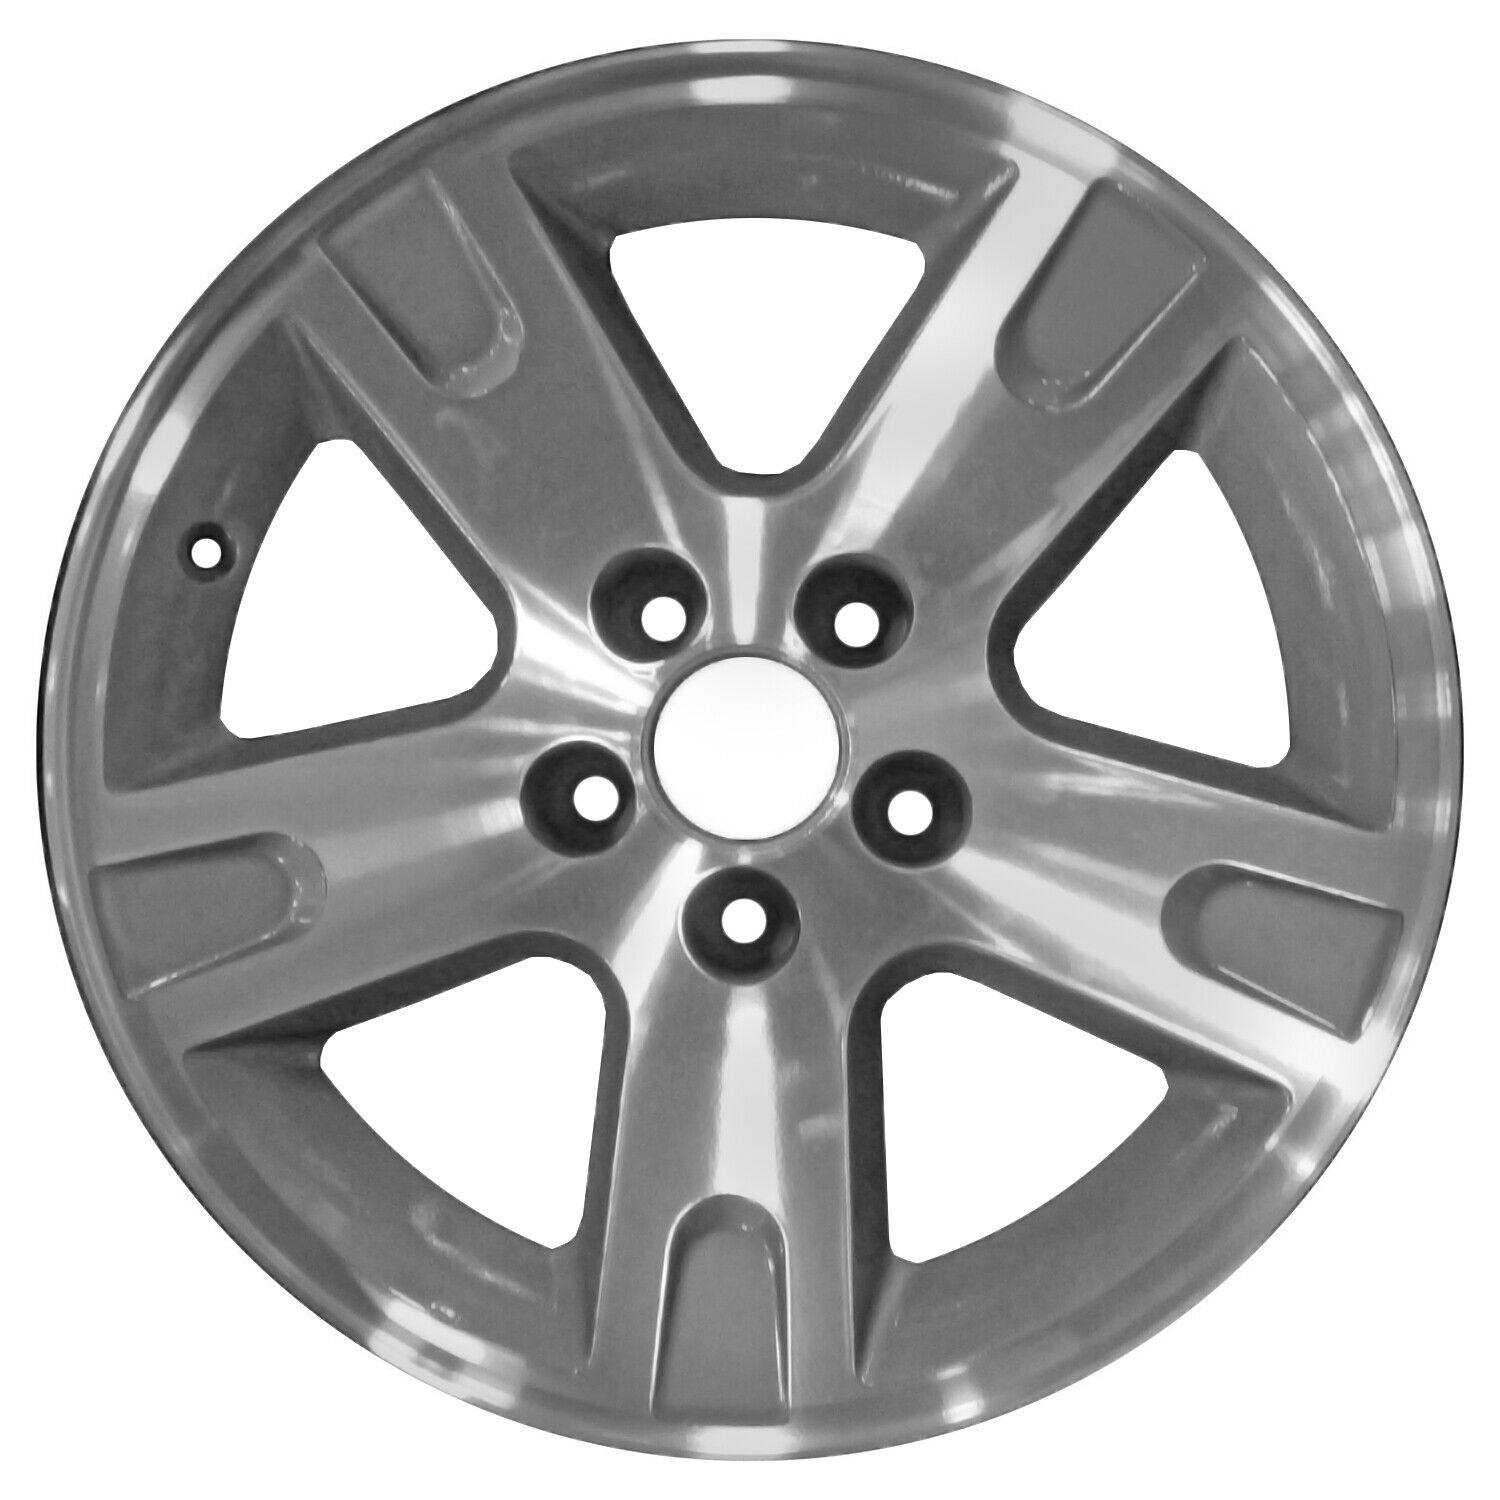 03463 Reconditioned OEM Aluminum Wheel 16x7 fits 2002-2011 Ford Ranger